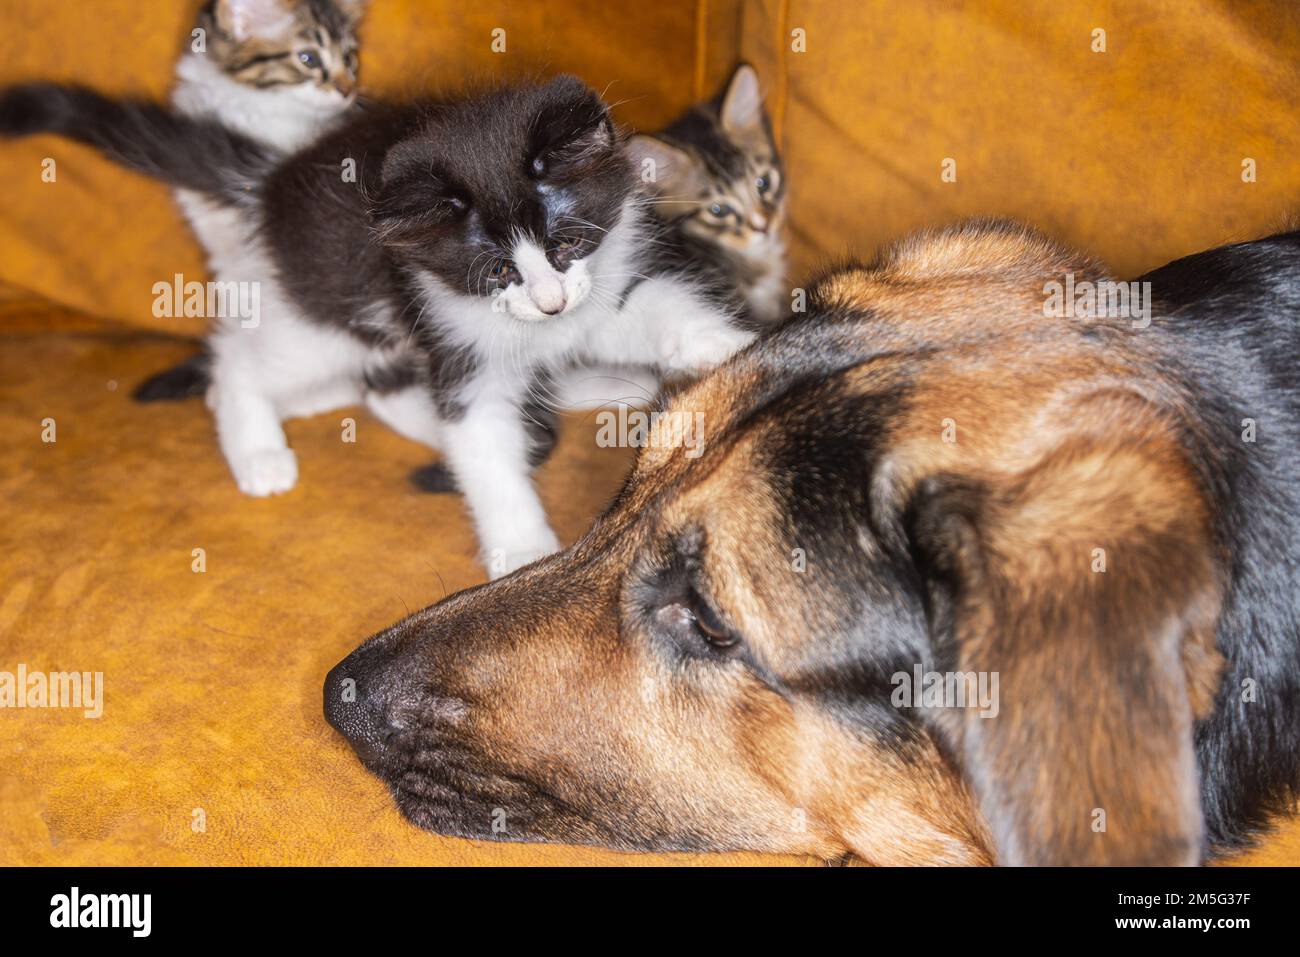 Small little kitty tease a dog. Cat and dog harmoniously side by side, Kitten protection across species. Animal care. Love and friendship. Domestic an Stock Photo